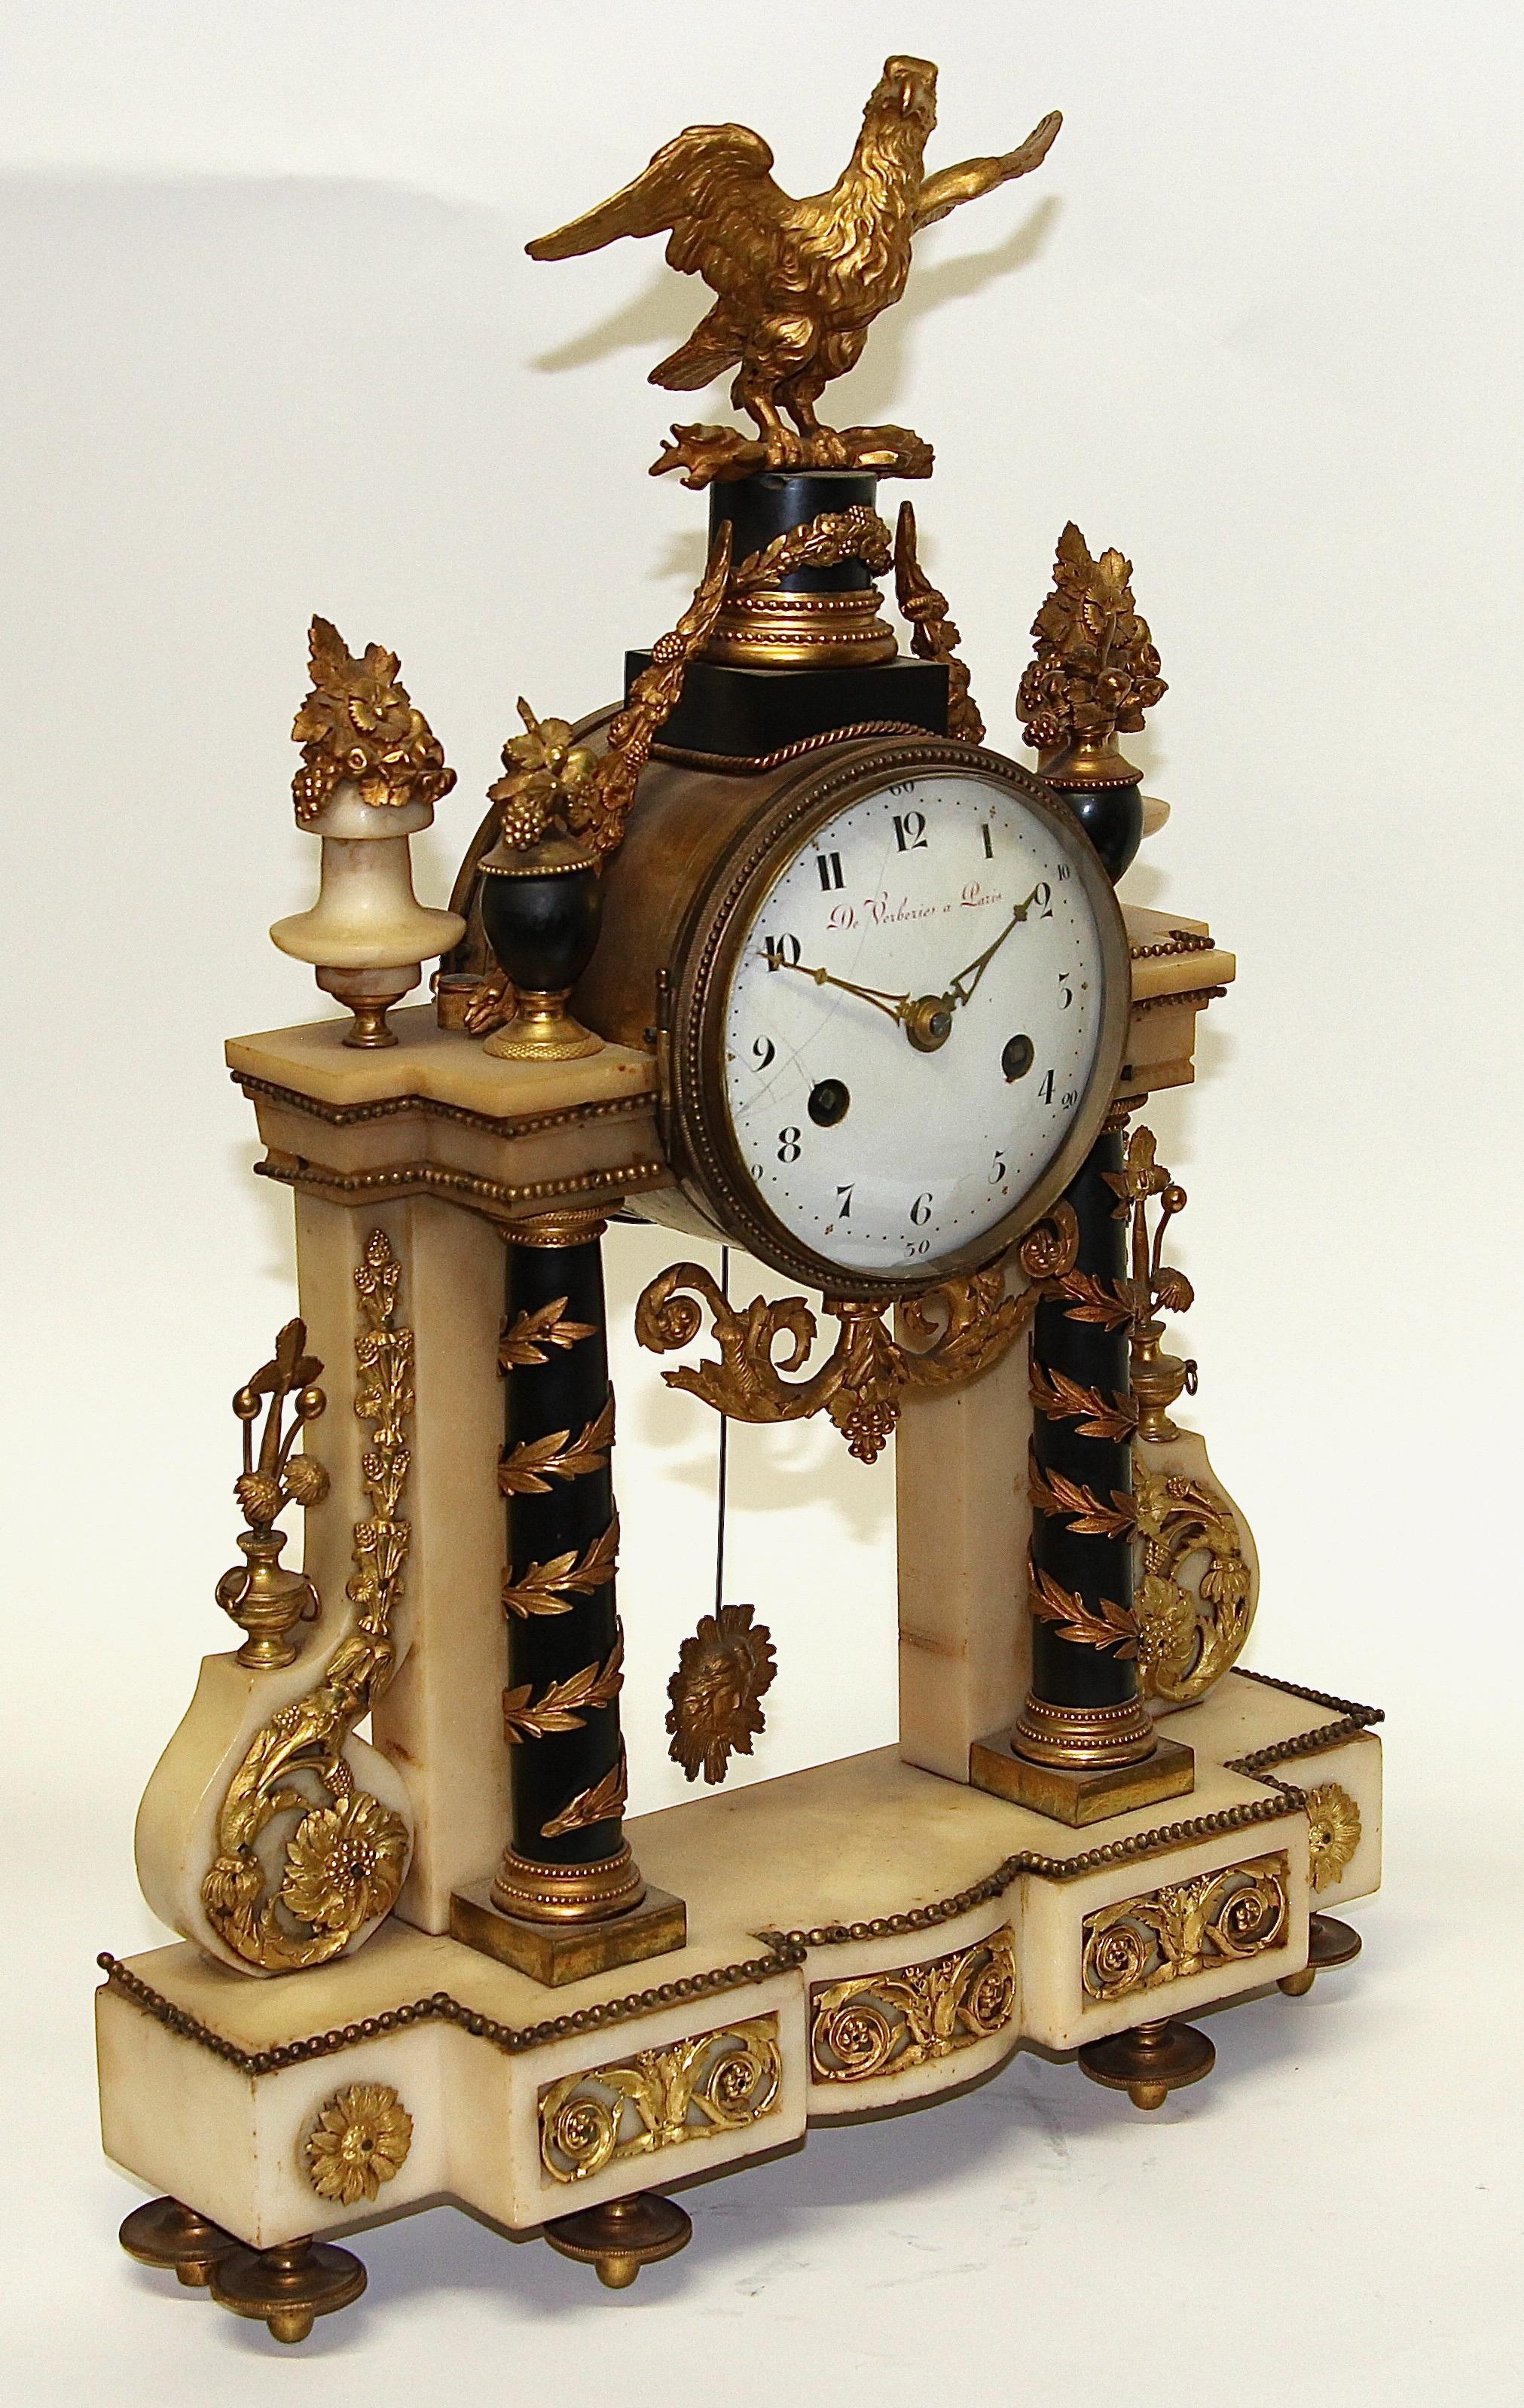 French Empire Ormolu Mantel Clock by Deverberie a Paris, Fire-Gilded For Sale 2